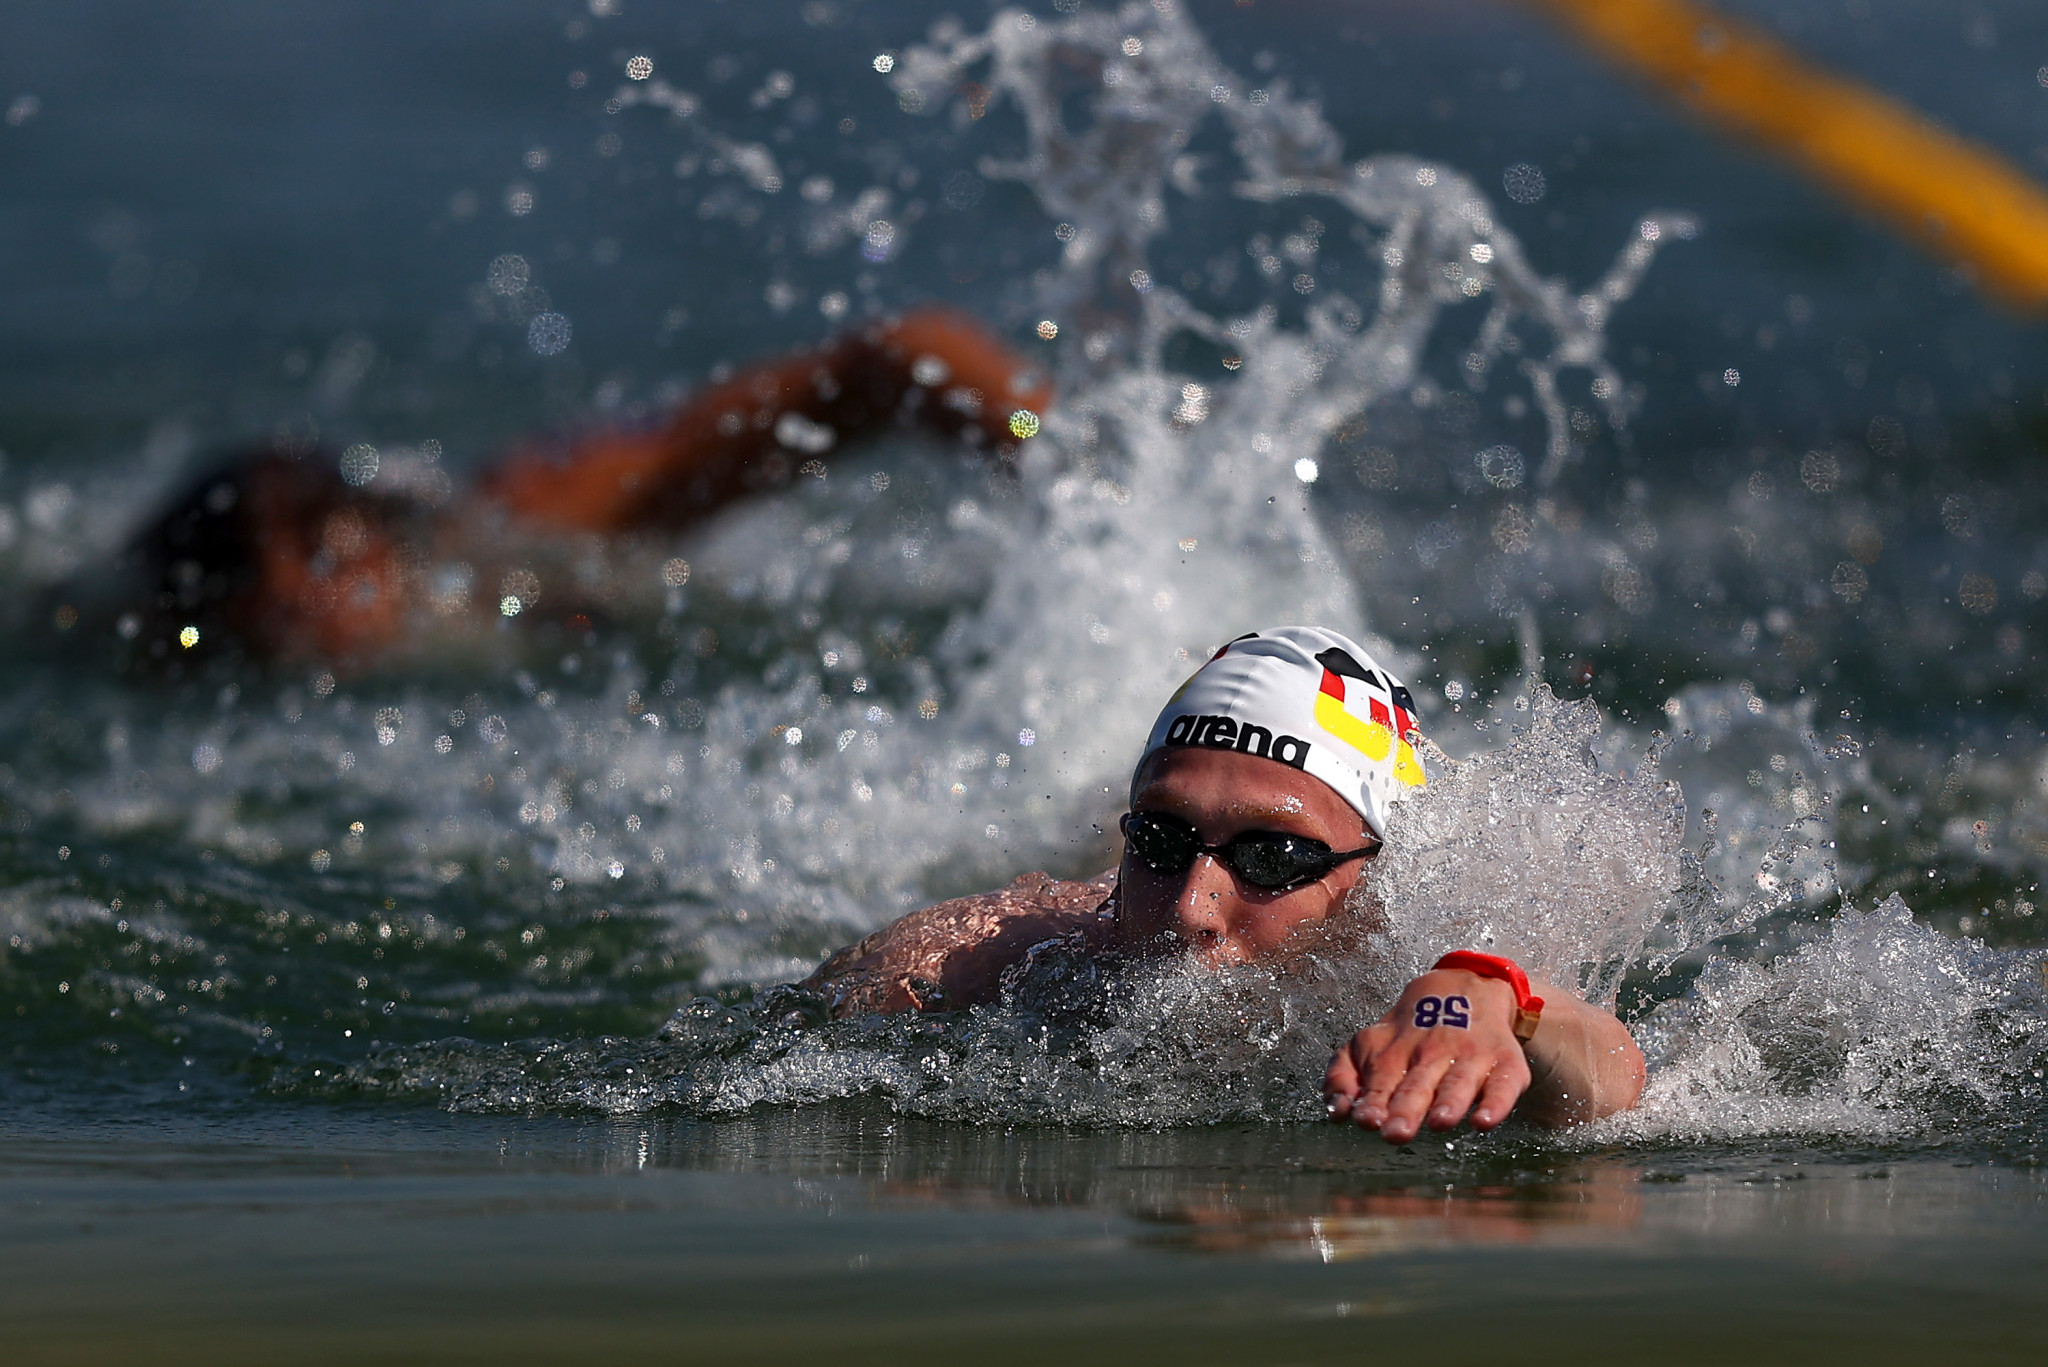 Germany's Florian Wellbrock's fourth medal of the FINA World Championships in Budapest was a gold in the men's 5km open water swimming race ©Getty Images